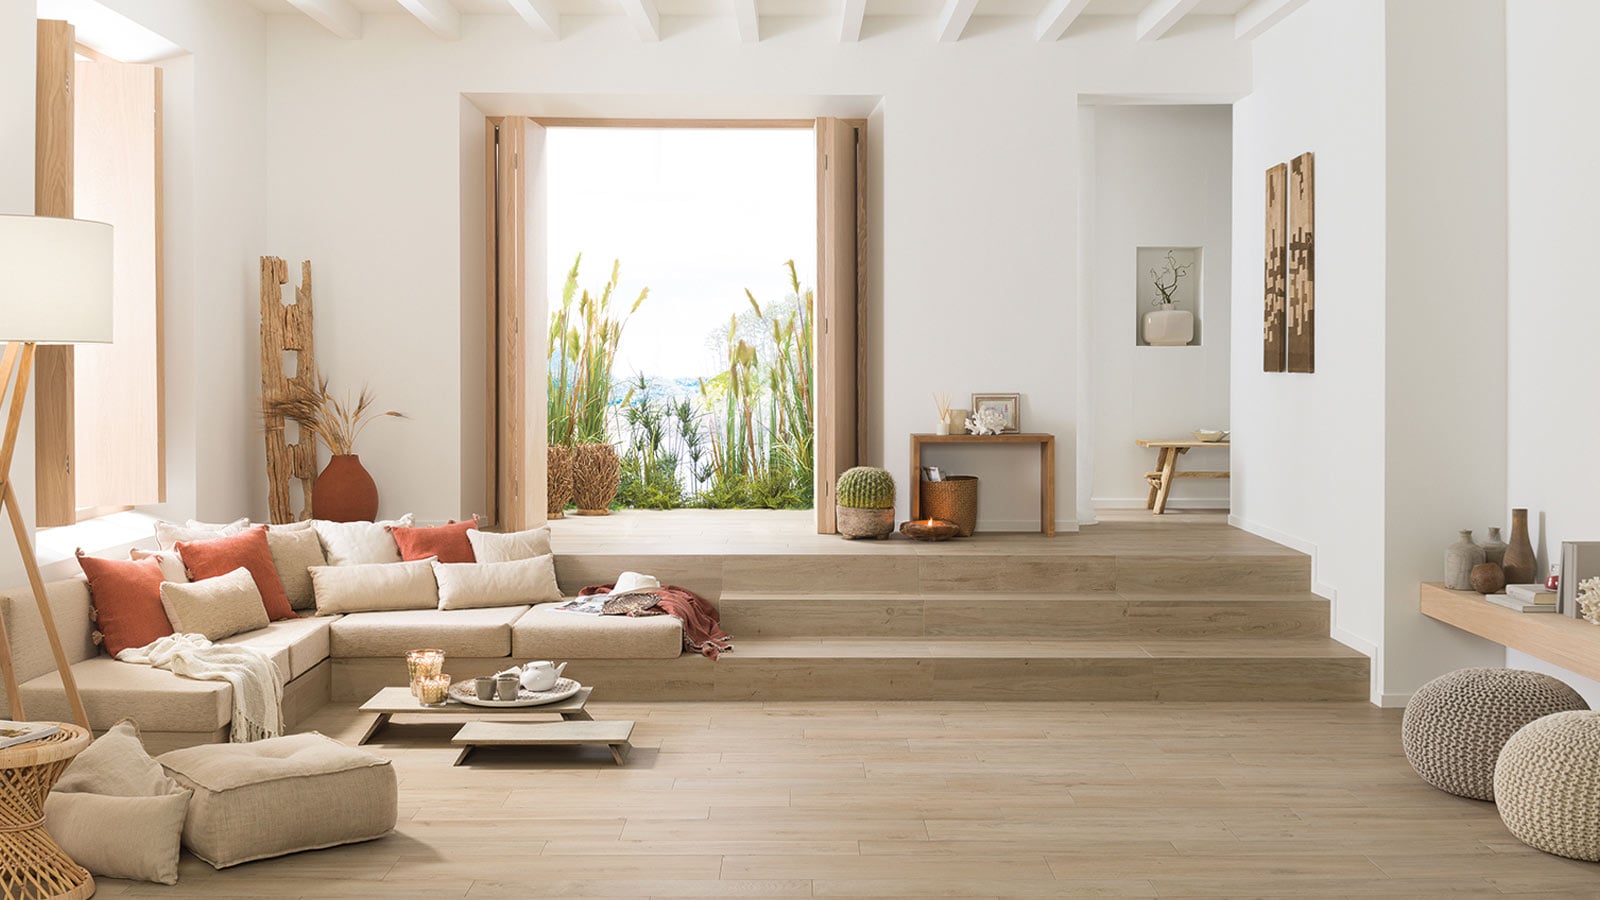 Mediterranean style houses with the Porcelanosa collections - PORCELANOSA  TrendBook